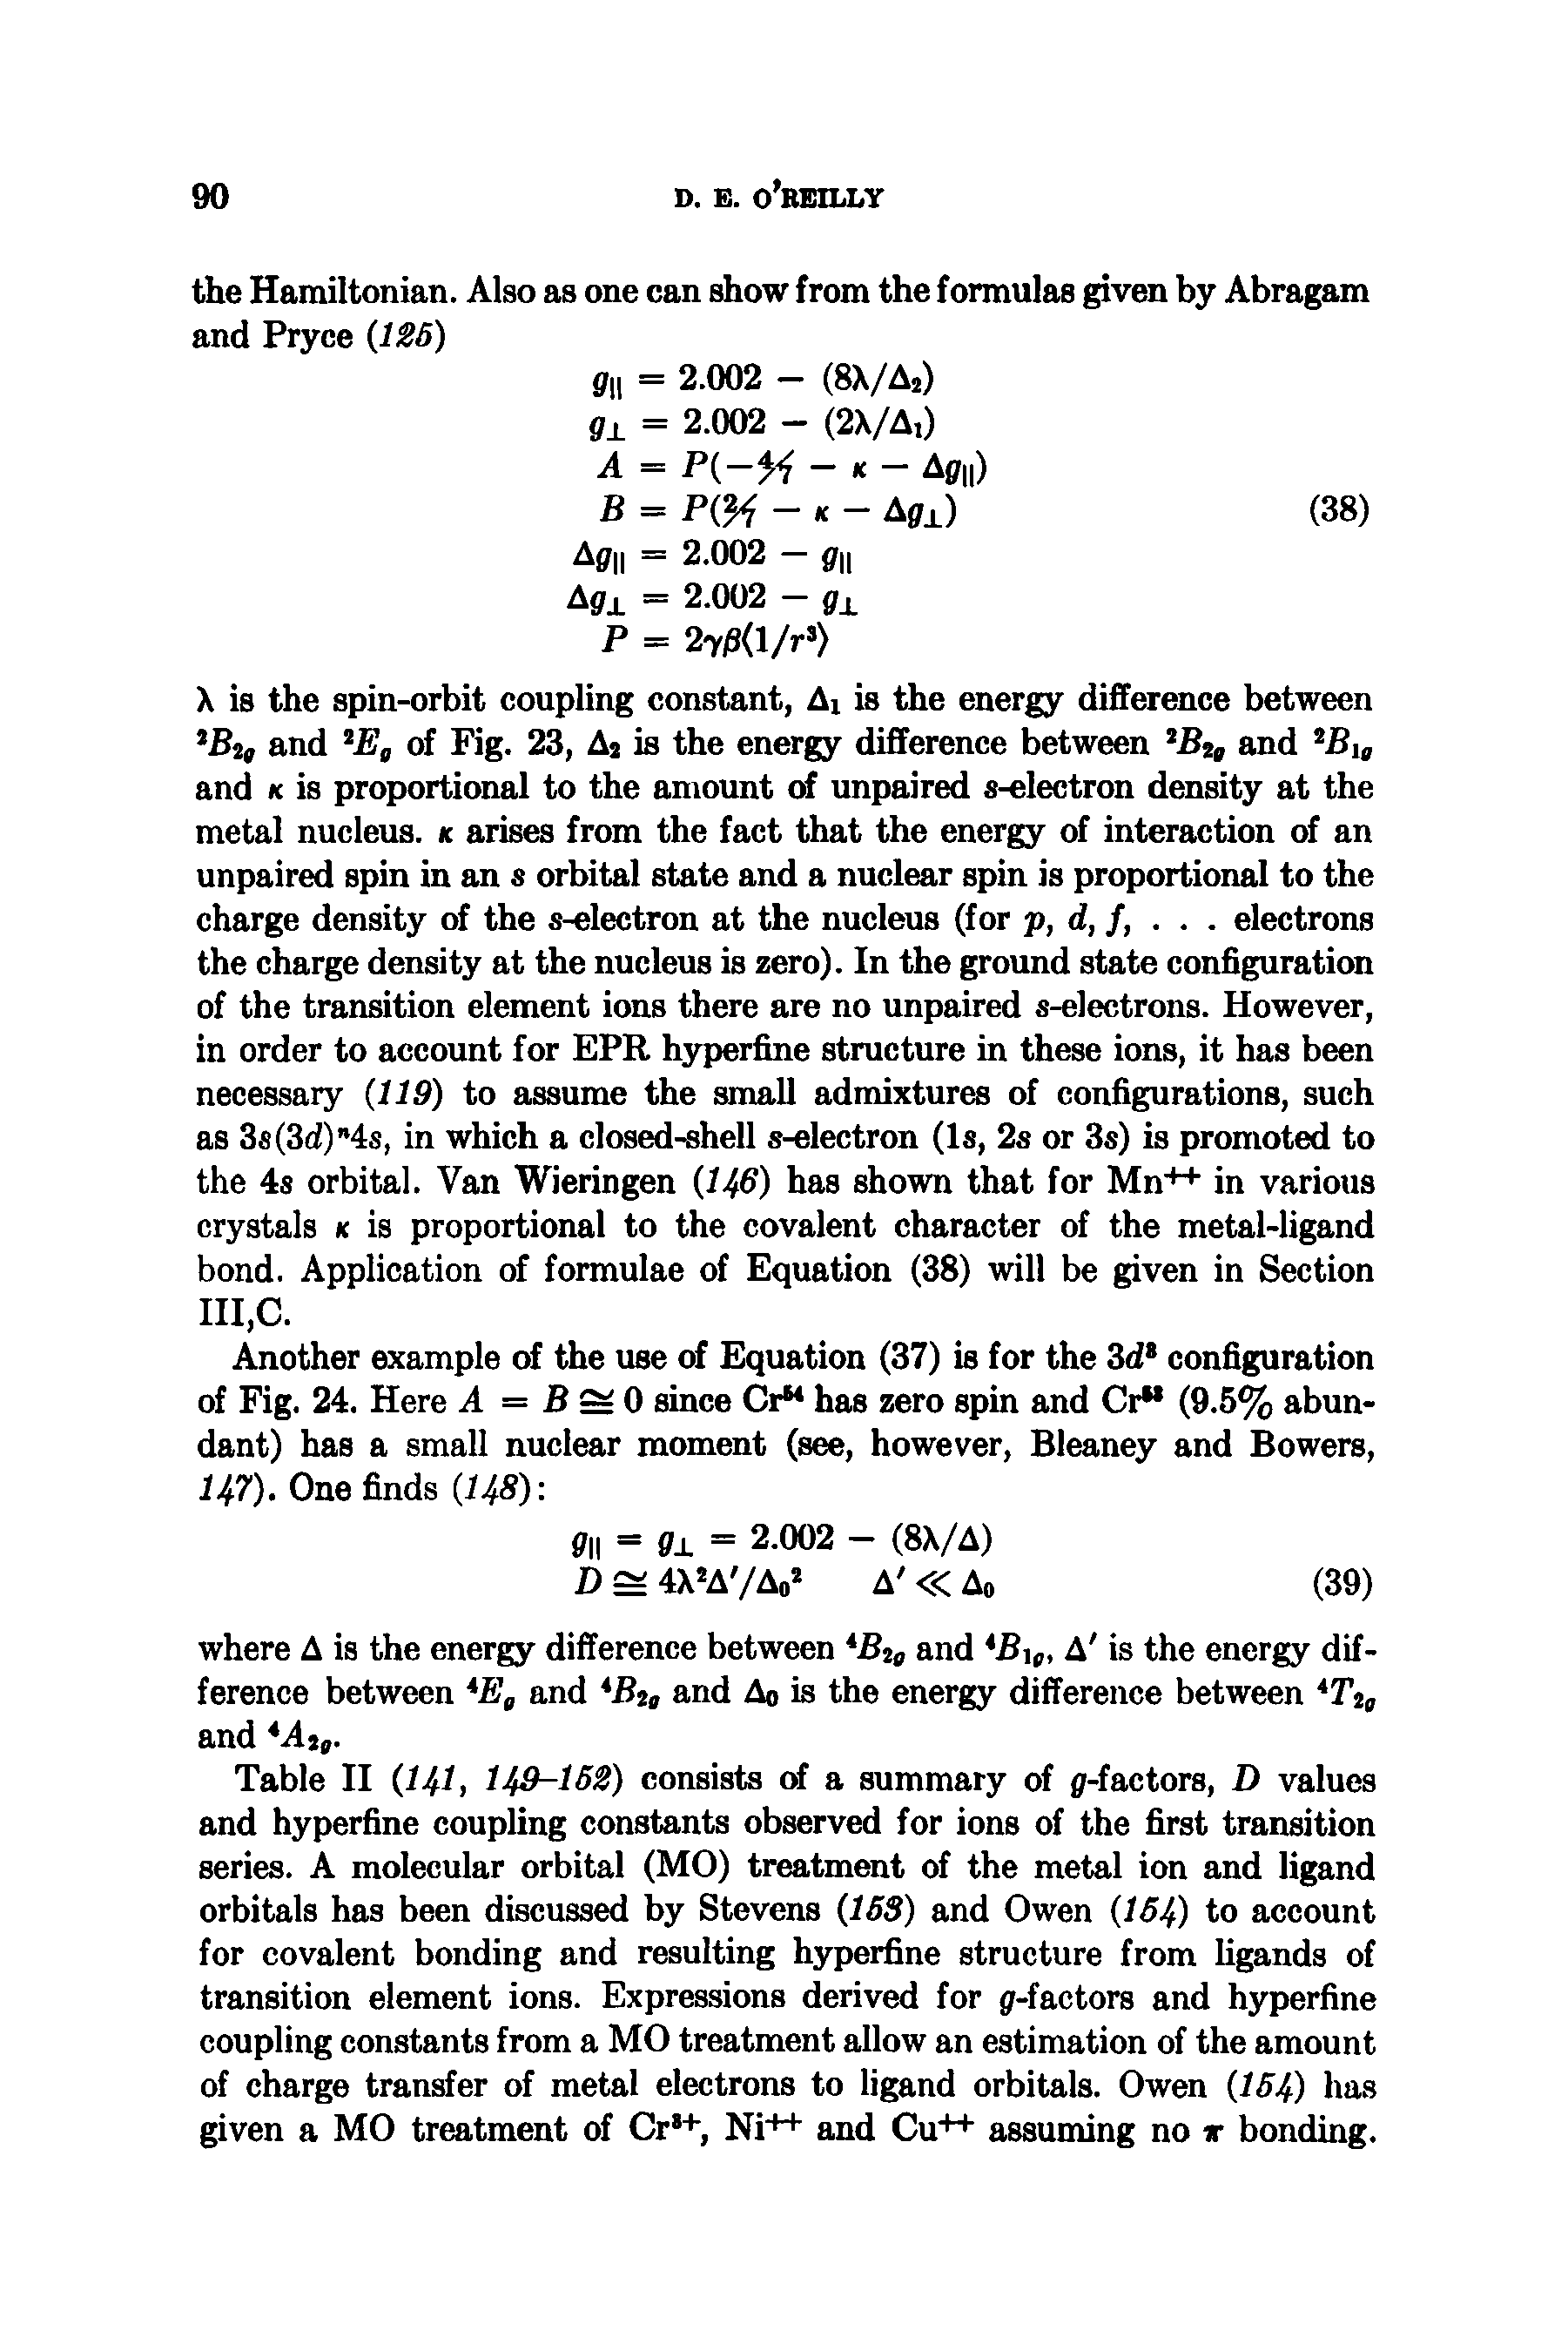 Table II I4I, 149-162) consists of a summary of 9-factors, D values and hyperfine coupling constants observed for ions of the first transition series. A molecular orbital (MO) treatment of the metal ion and ligand orbitals has been discussed by Stevens 163) and Owen 164) to account for covalent bonding and resulting hyperfine structure from hgands of transition element ions. Expressions derived for g-factors and hyperfine coupling constants from a MO treatment allow an estimation of the amount of charge transfer of metal electrons to ligand orbitals. Owen 164) has given a MO treatment of Cr +, Ni++ and Cu++ assuming no t bonding.